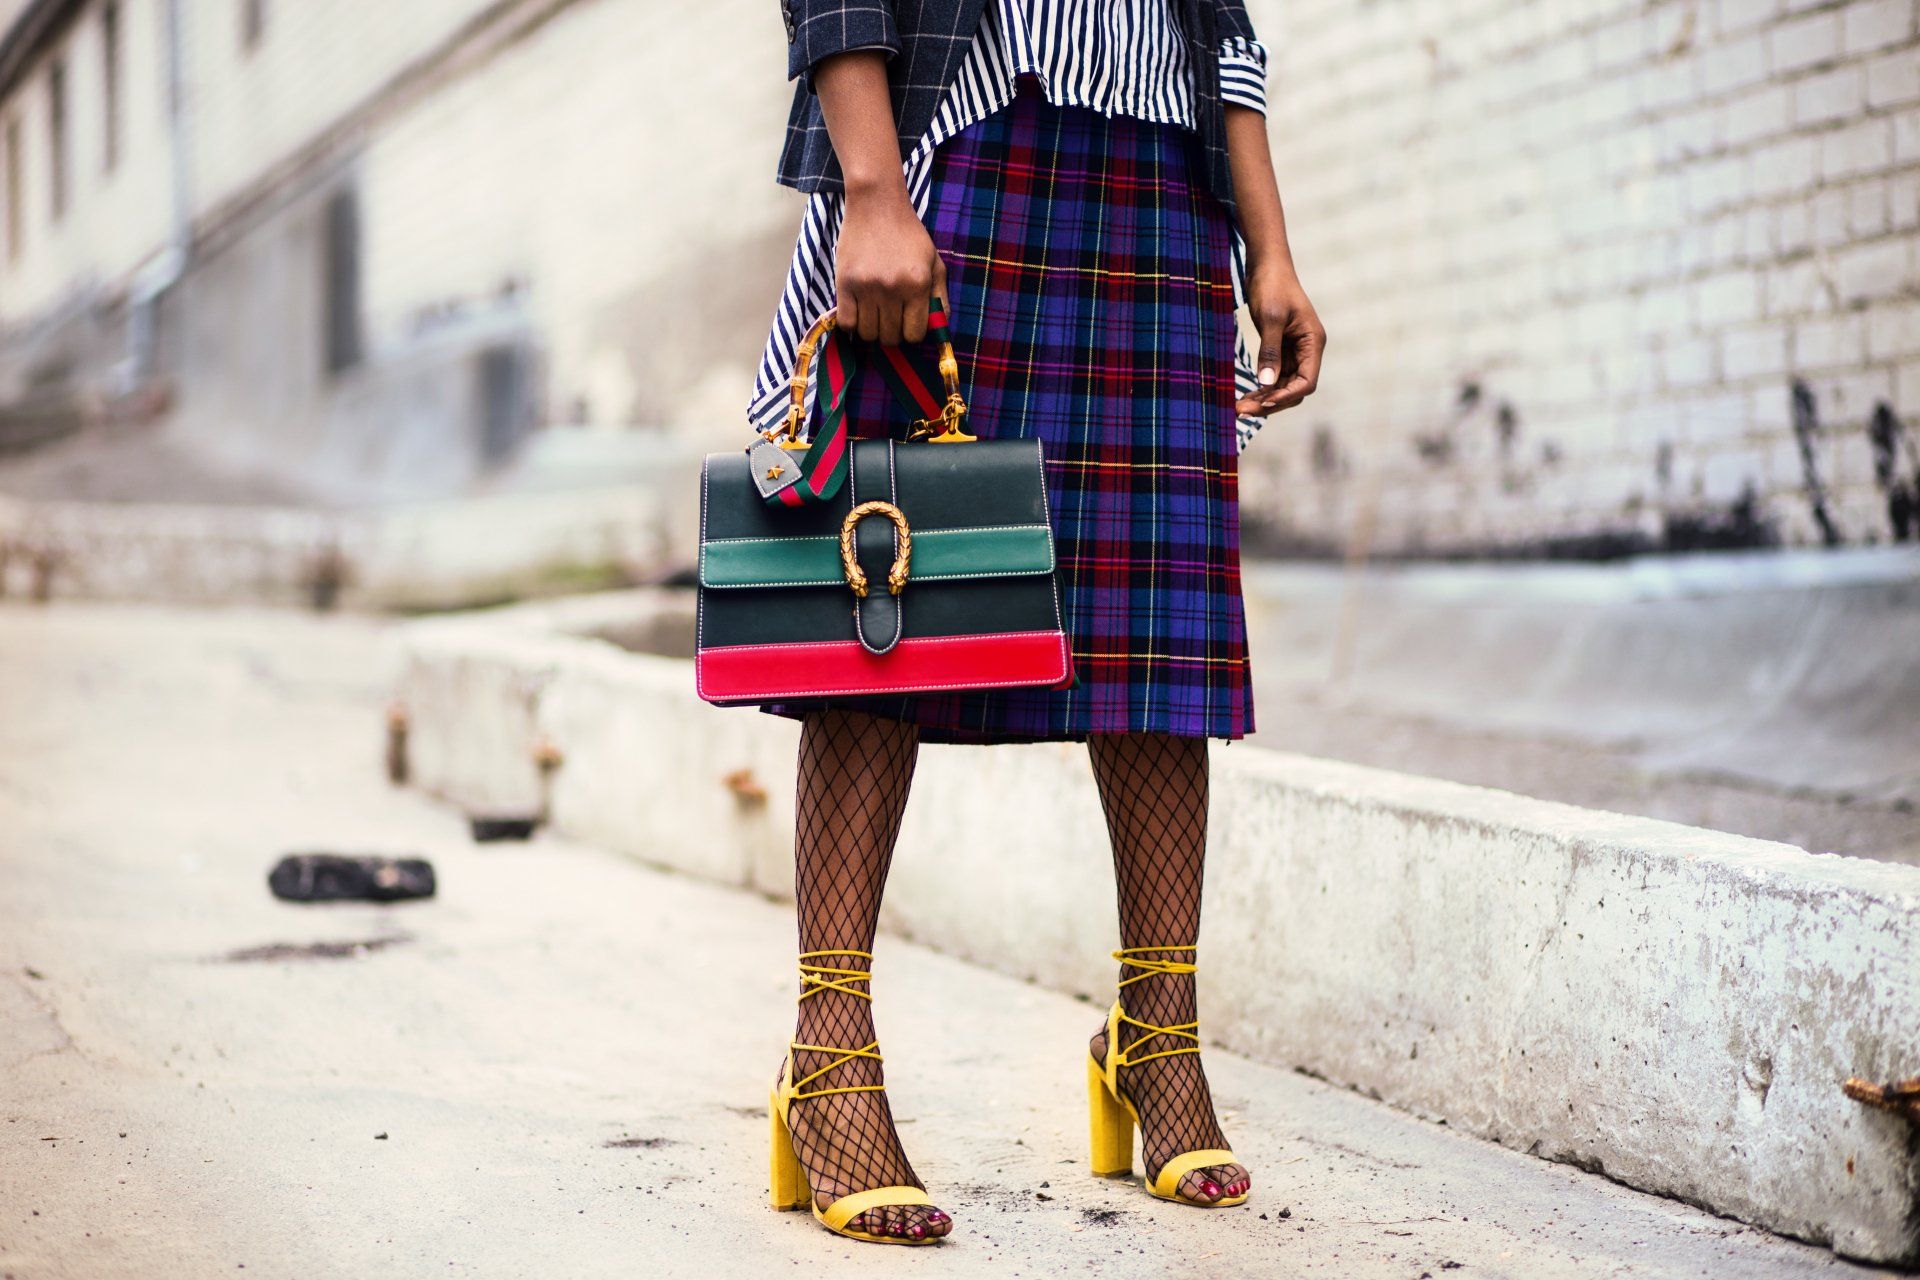 a woman in a plaid skirt is holding a colorful purse